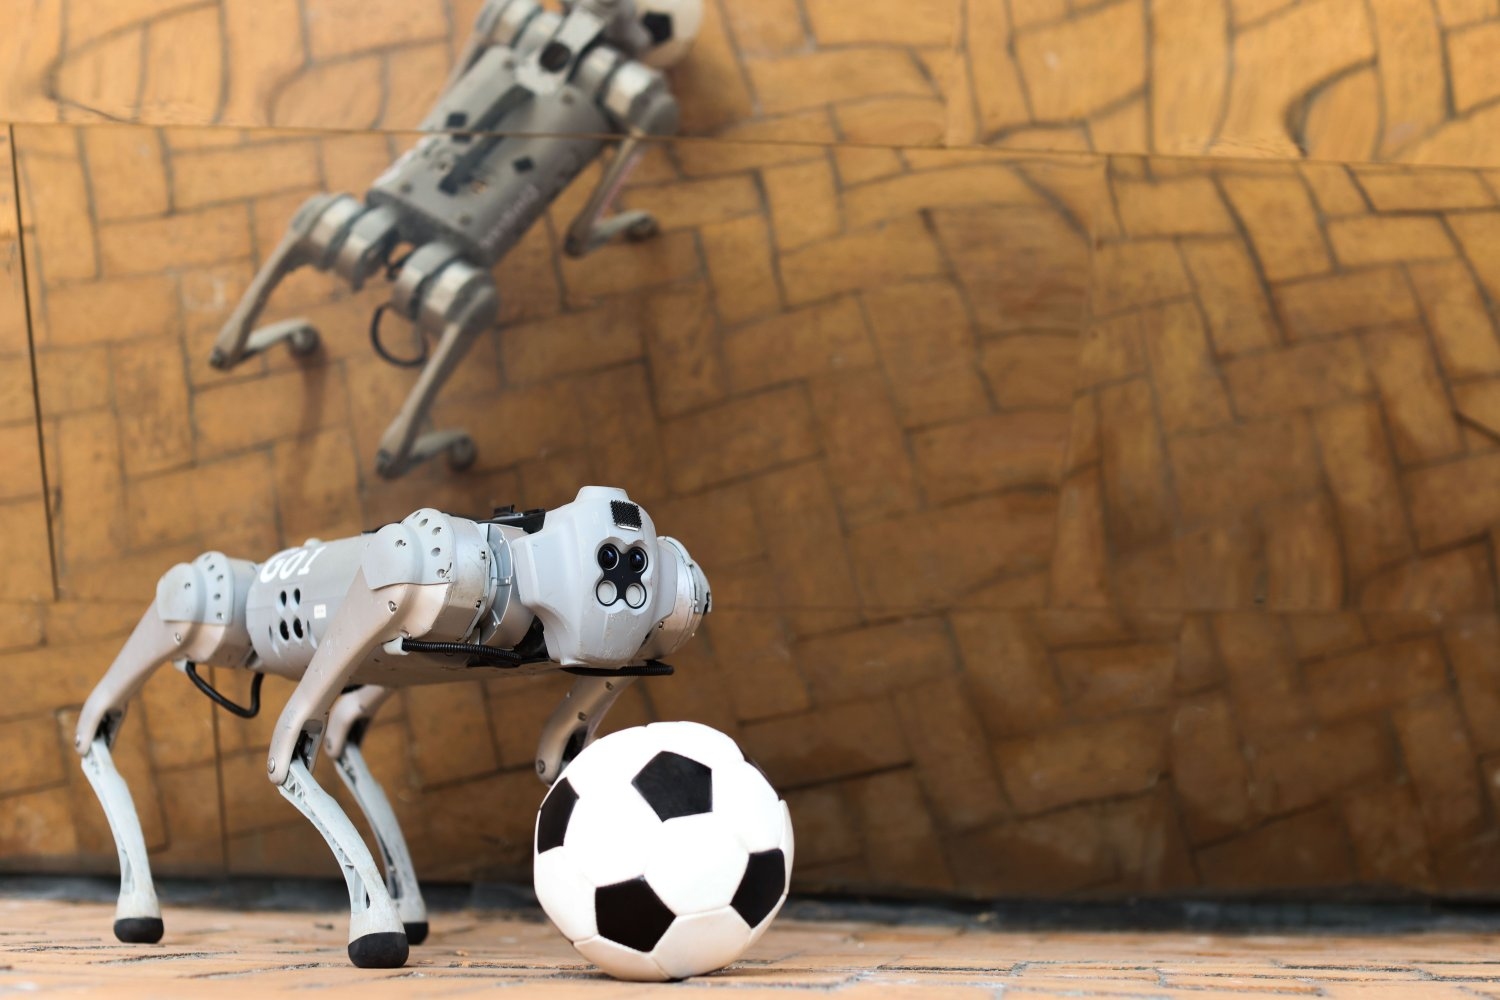 Researchers created DribbleBot, a system for in-the-wild dribbling on diverse natural terrains including sand, gravel, mud, and snow using onboard sensing and computing. In addition to these football feats, such robots may someday aid humans in search-and-rescue missions.